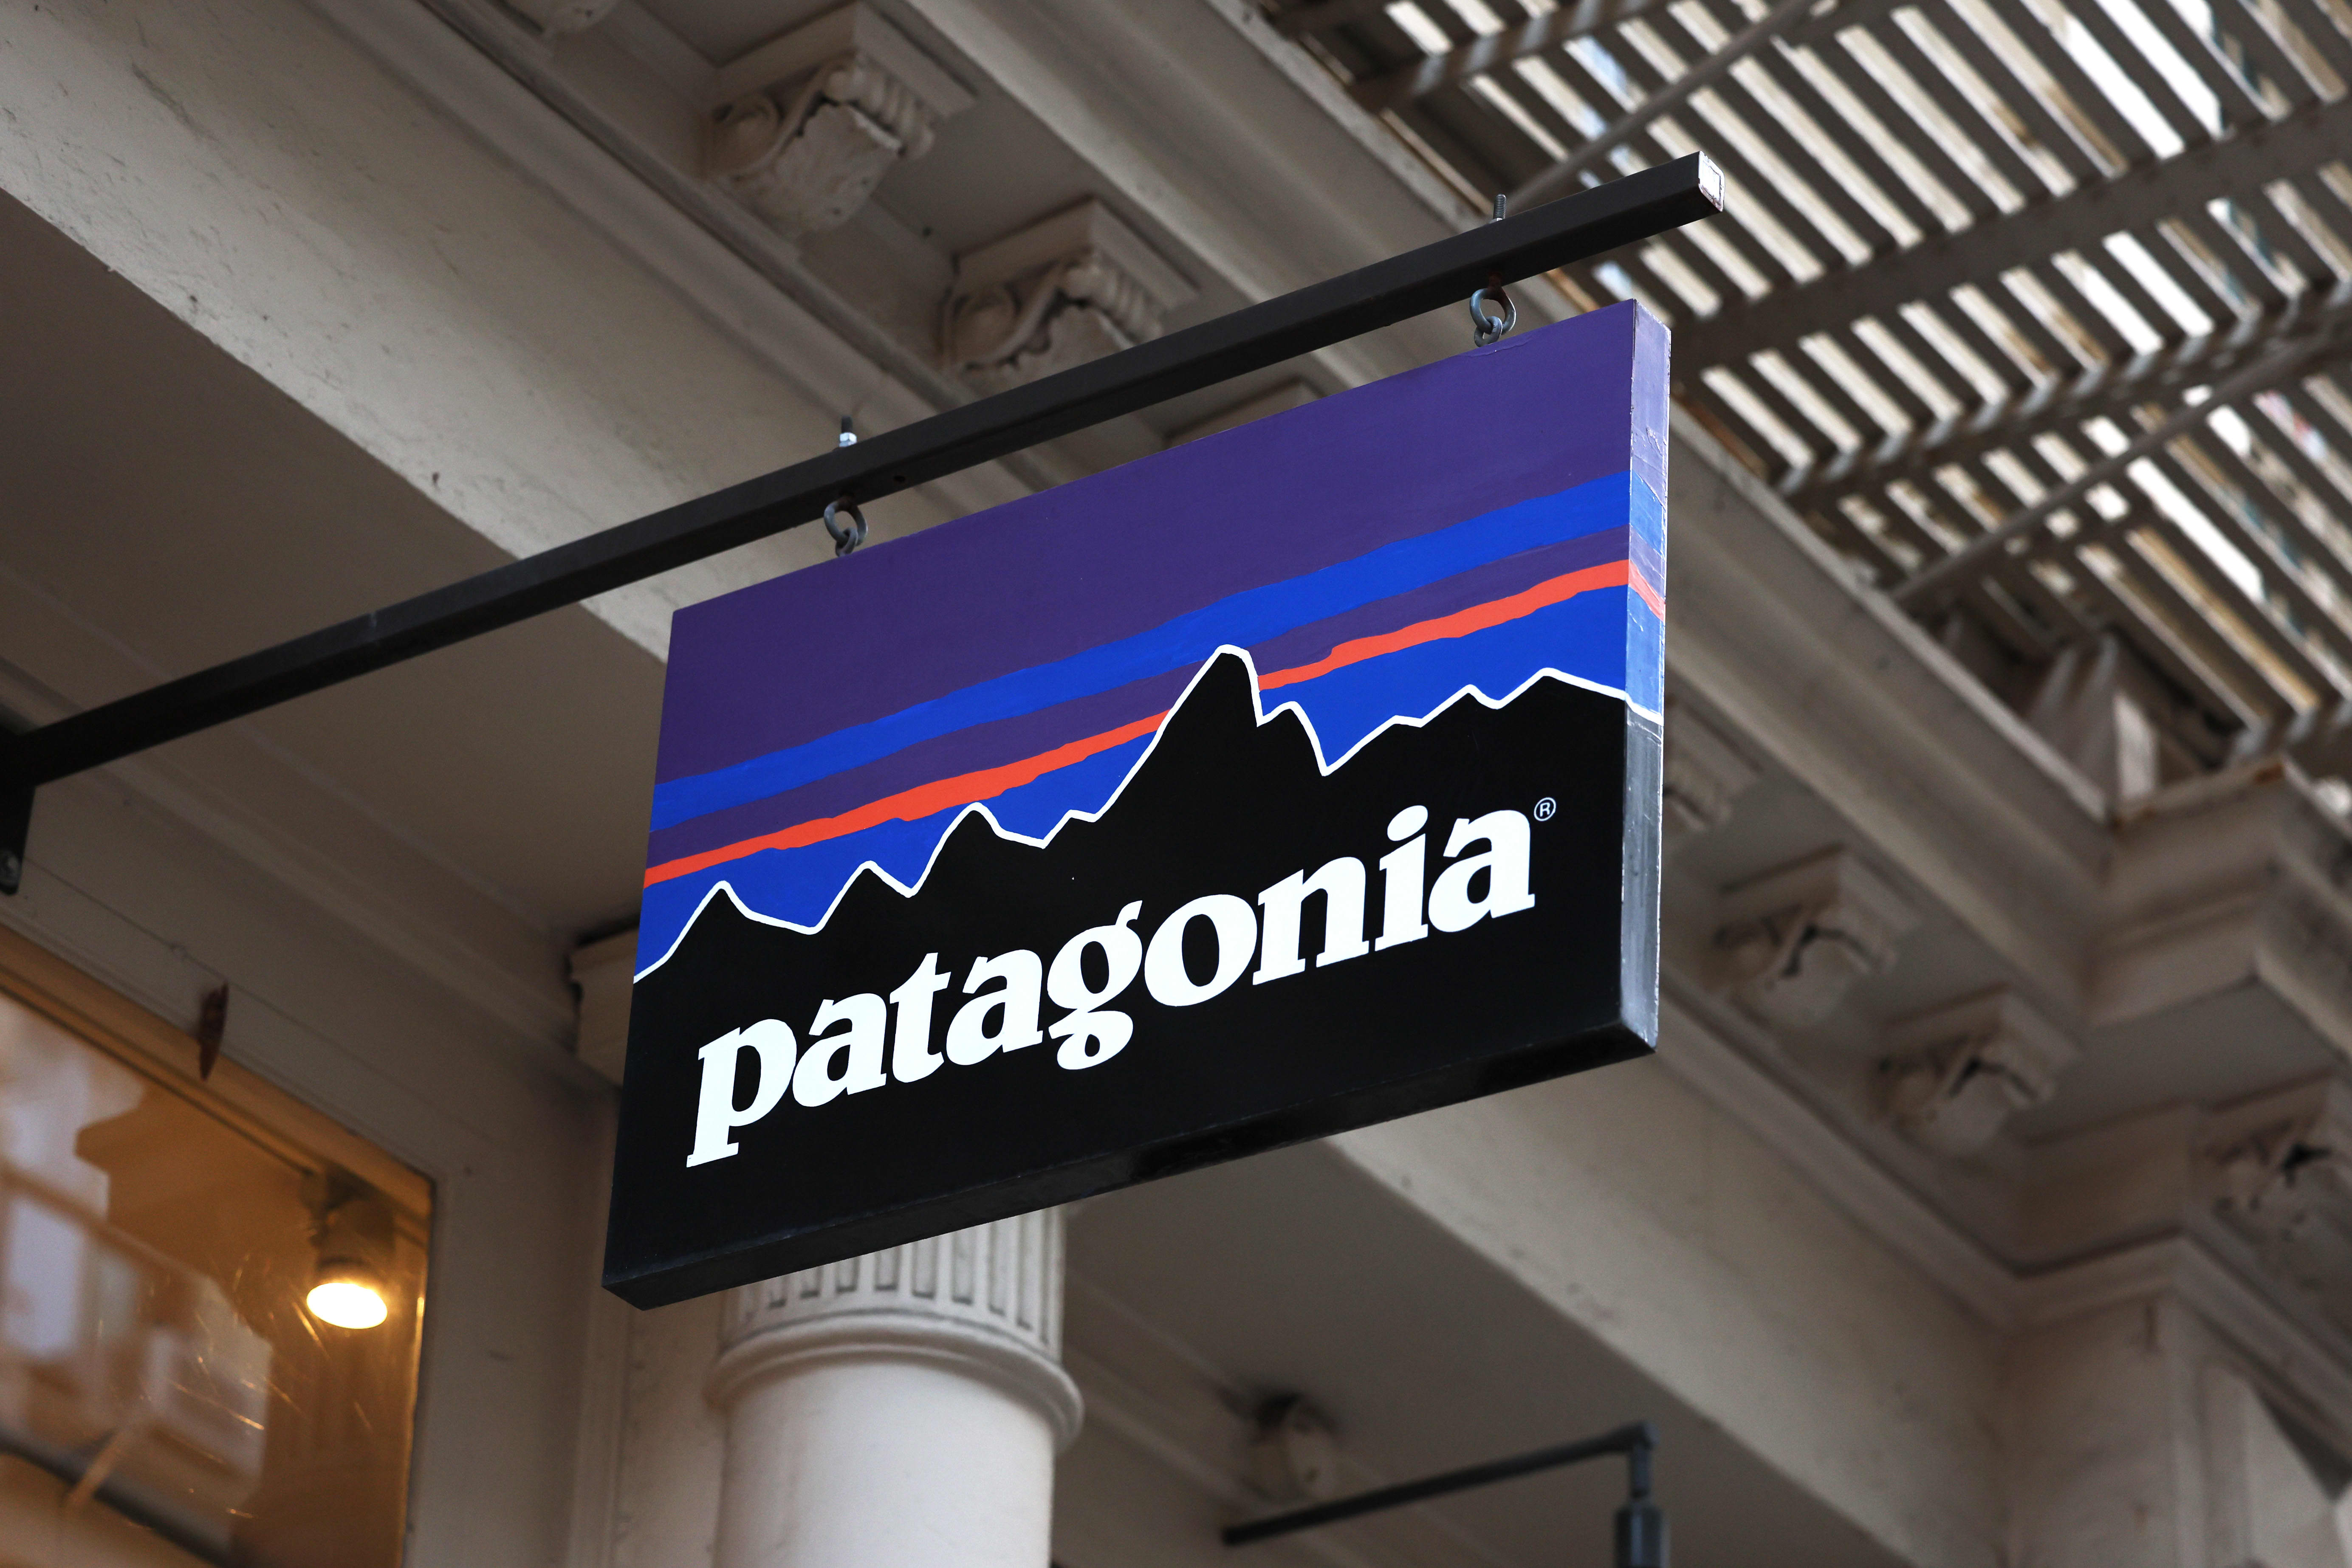 udslæt Miniature træfning Patagonia must remain competitive for climate donation to work: CEO